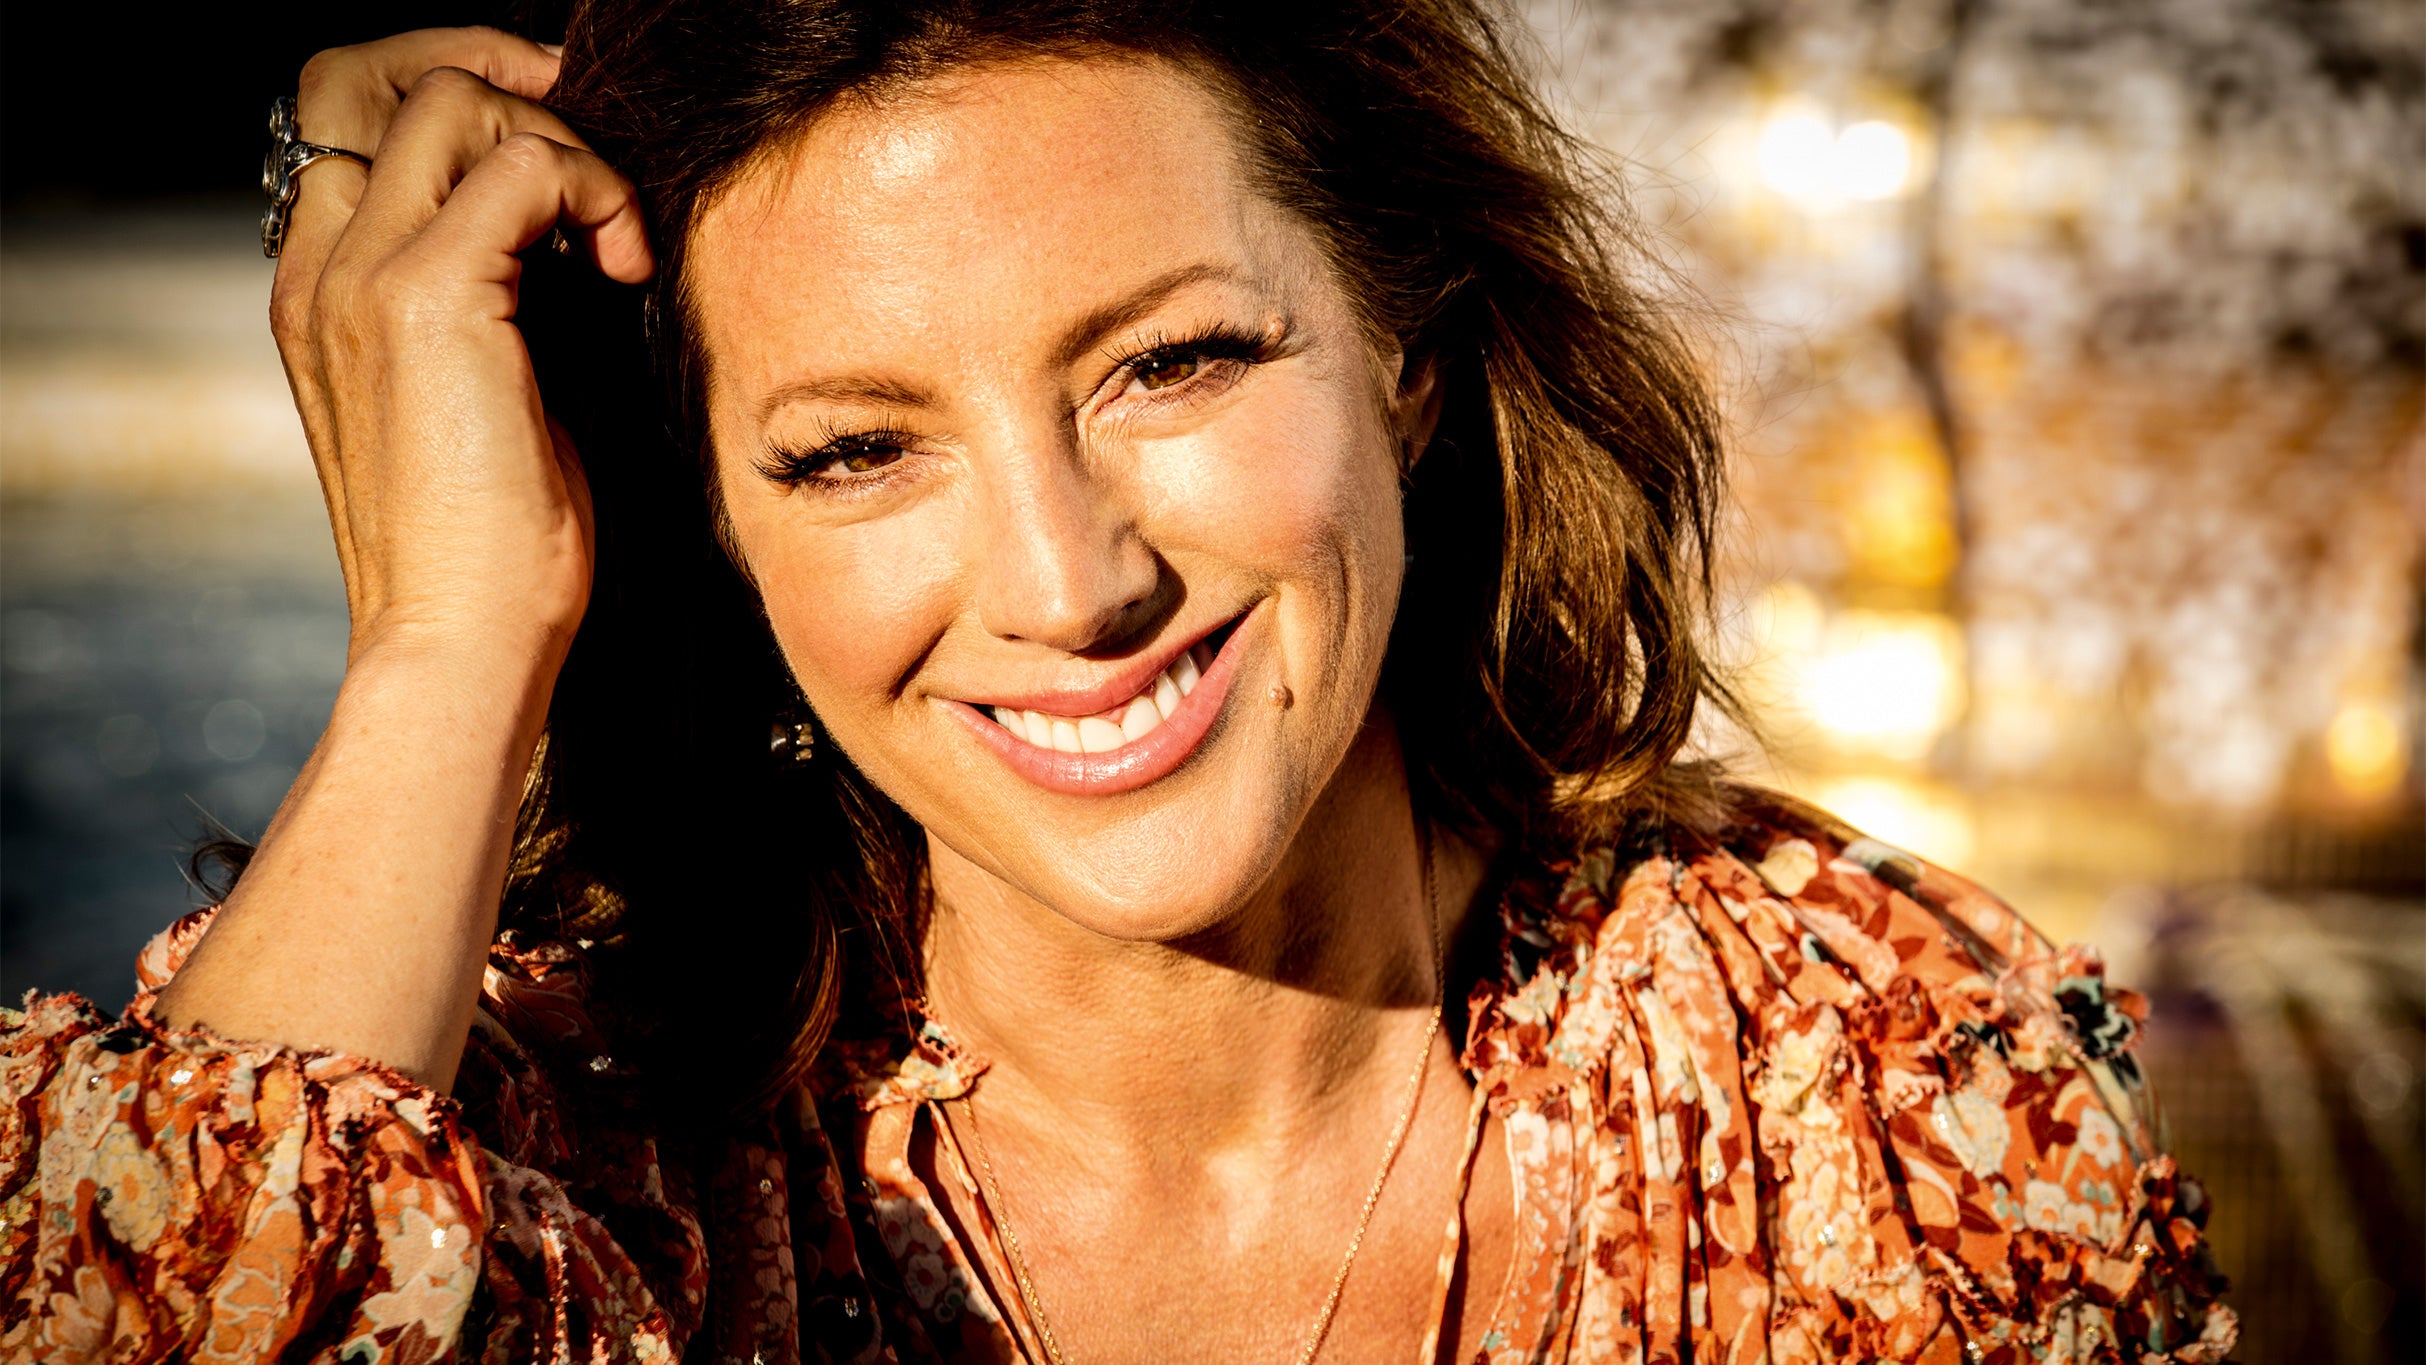 Sarah McLachlan: Fumbling Towards Ecstasy 30th Anniversary Tour presale password for concert tickets in Vancouver, BC (Pacific Coliseum)